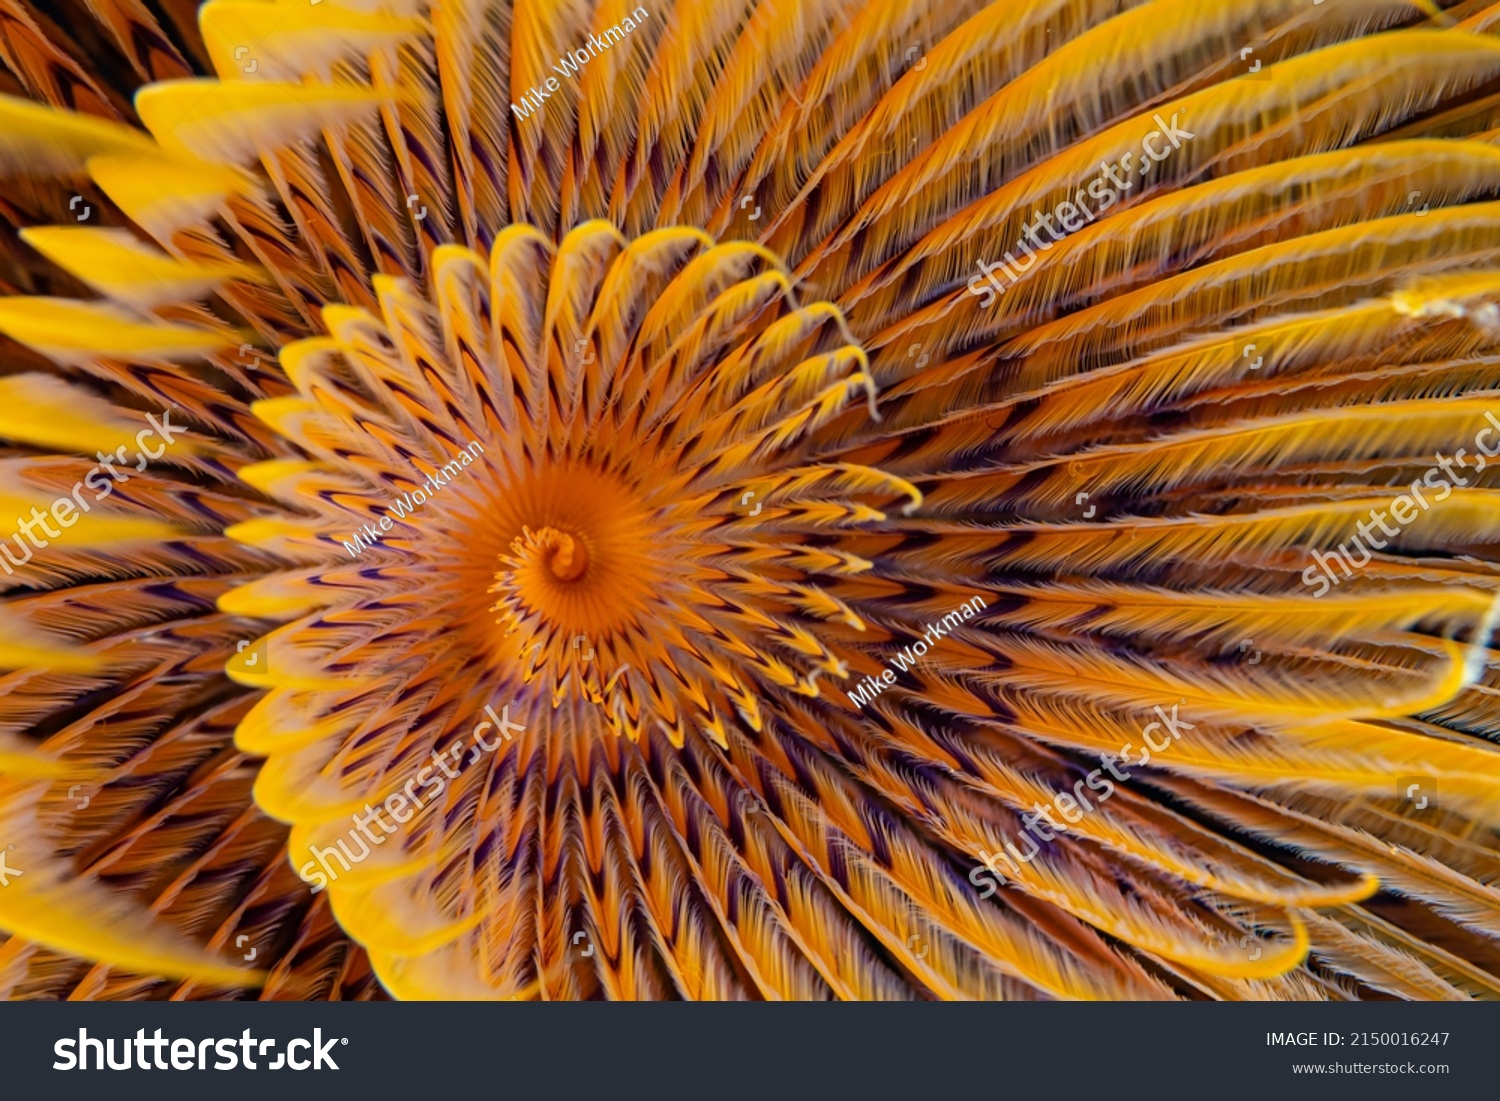 Close up detail of the spiraling colors of a tube worm  #2150016247